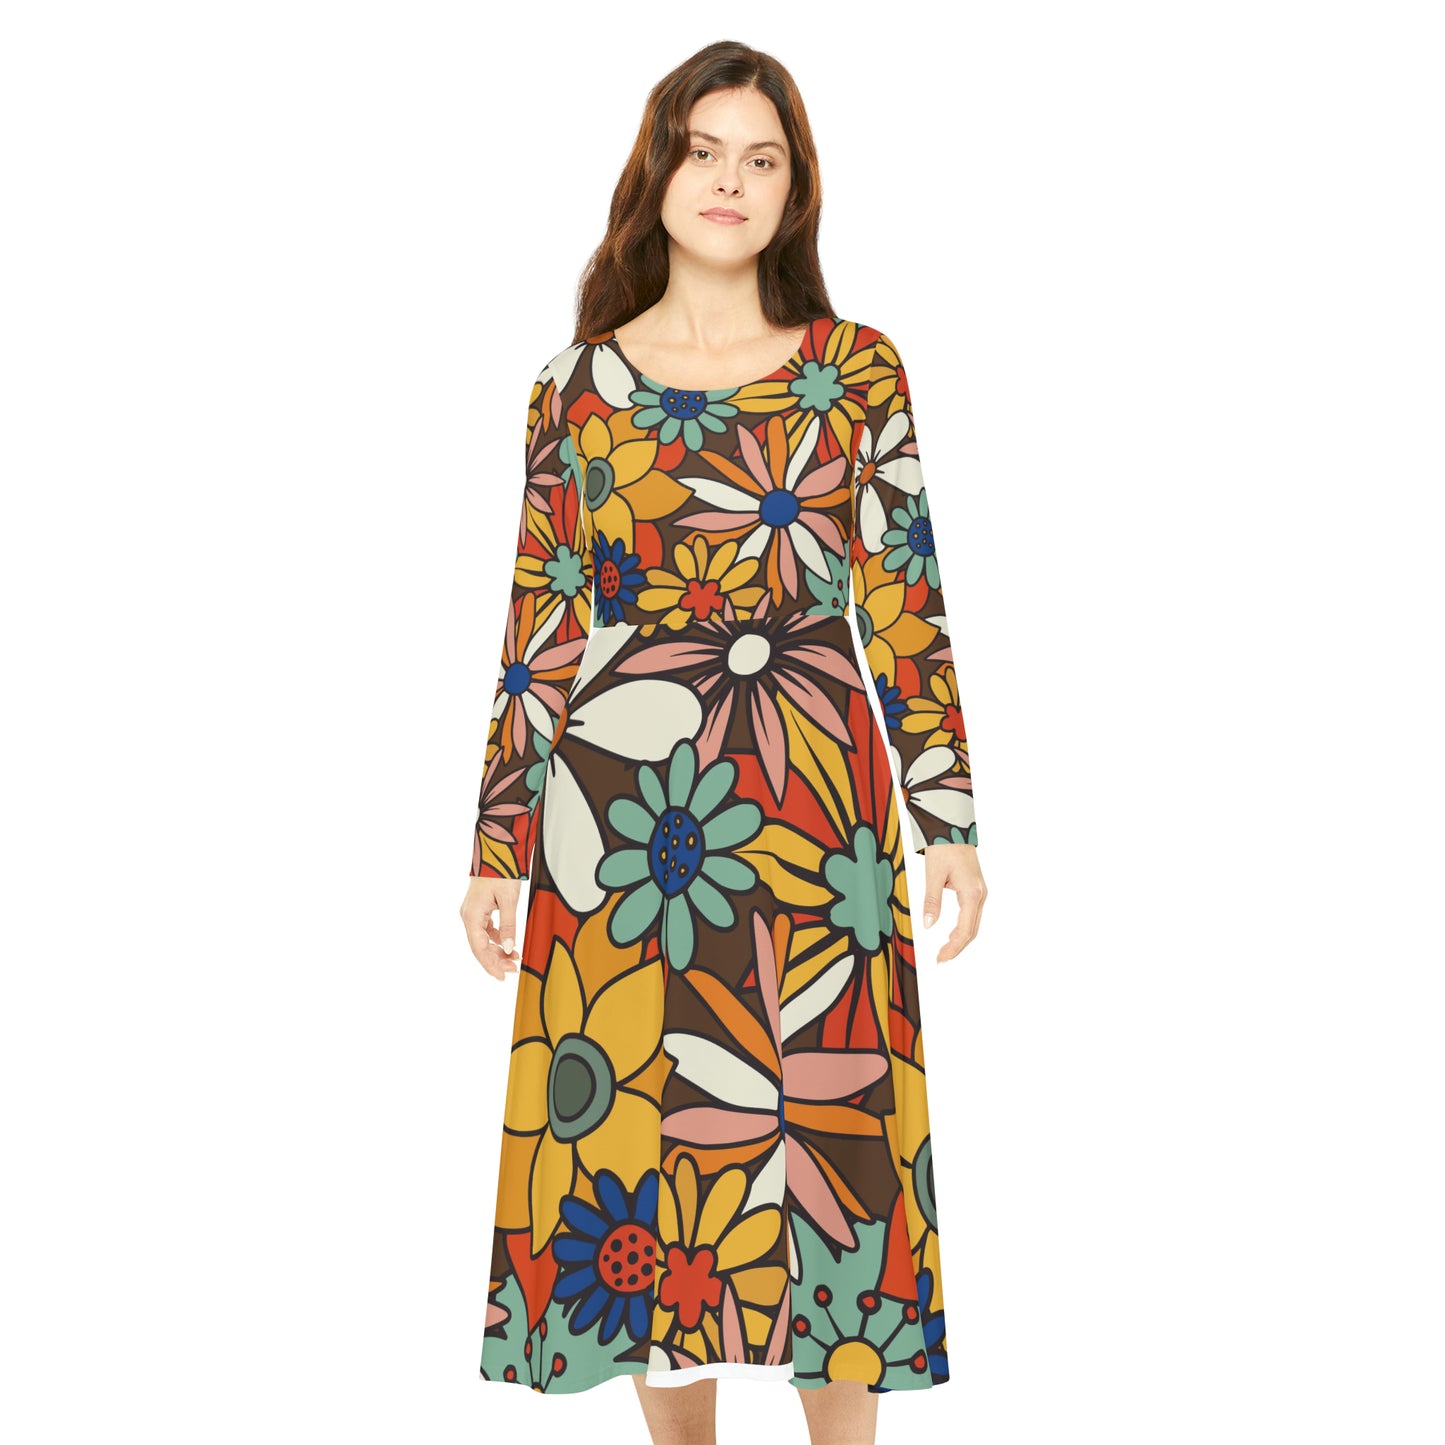 Flower Is My World- Long Sleeve Dress Collection